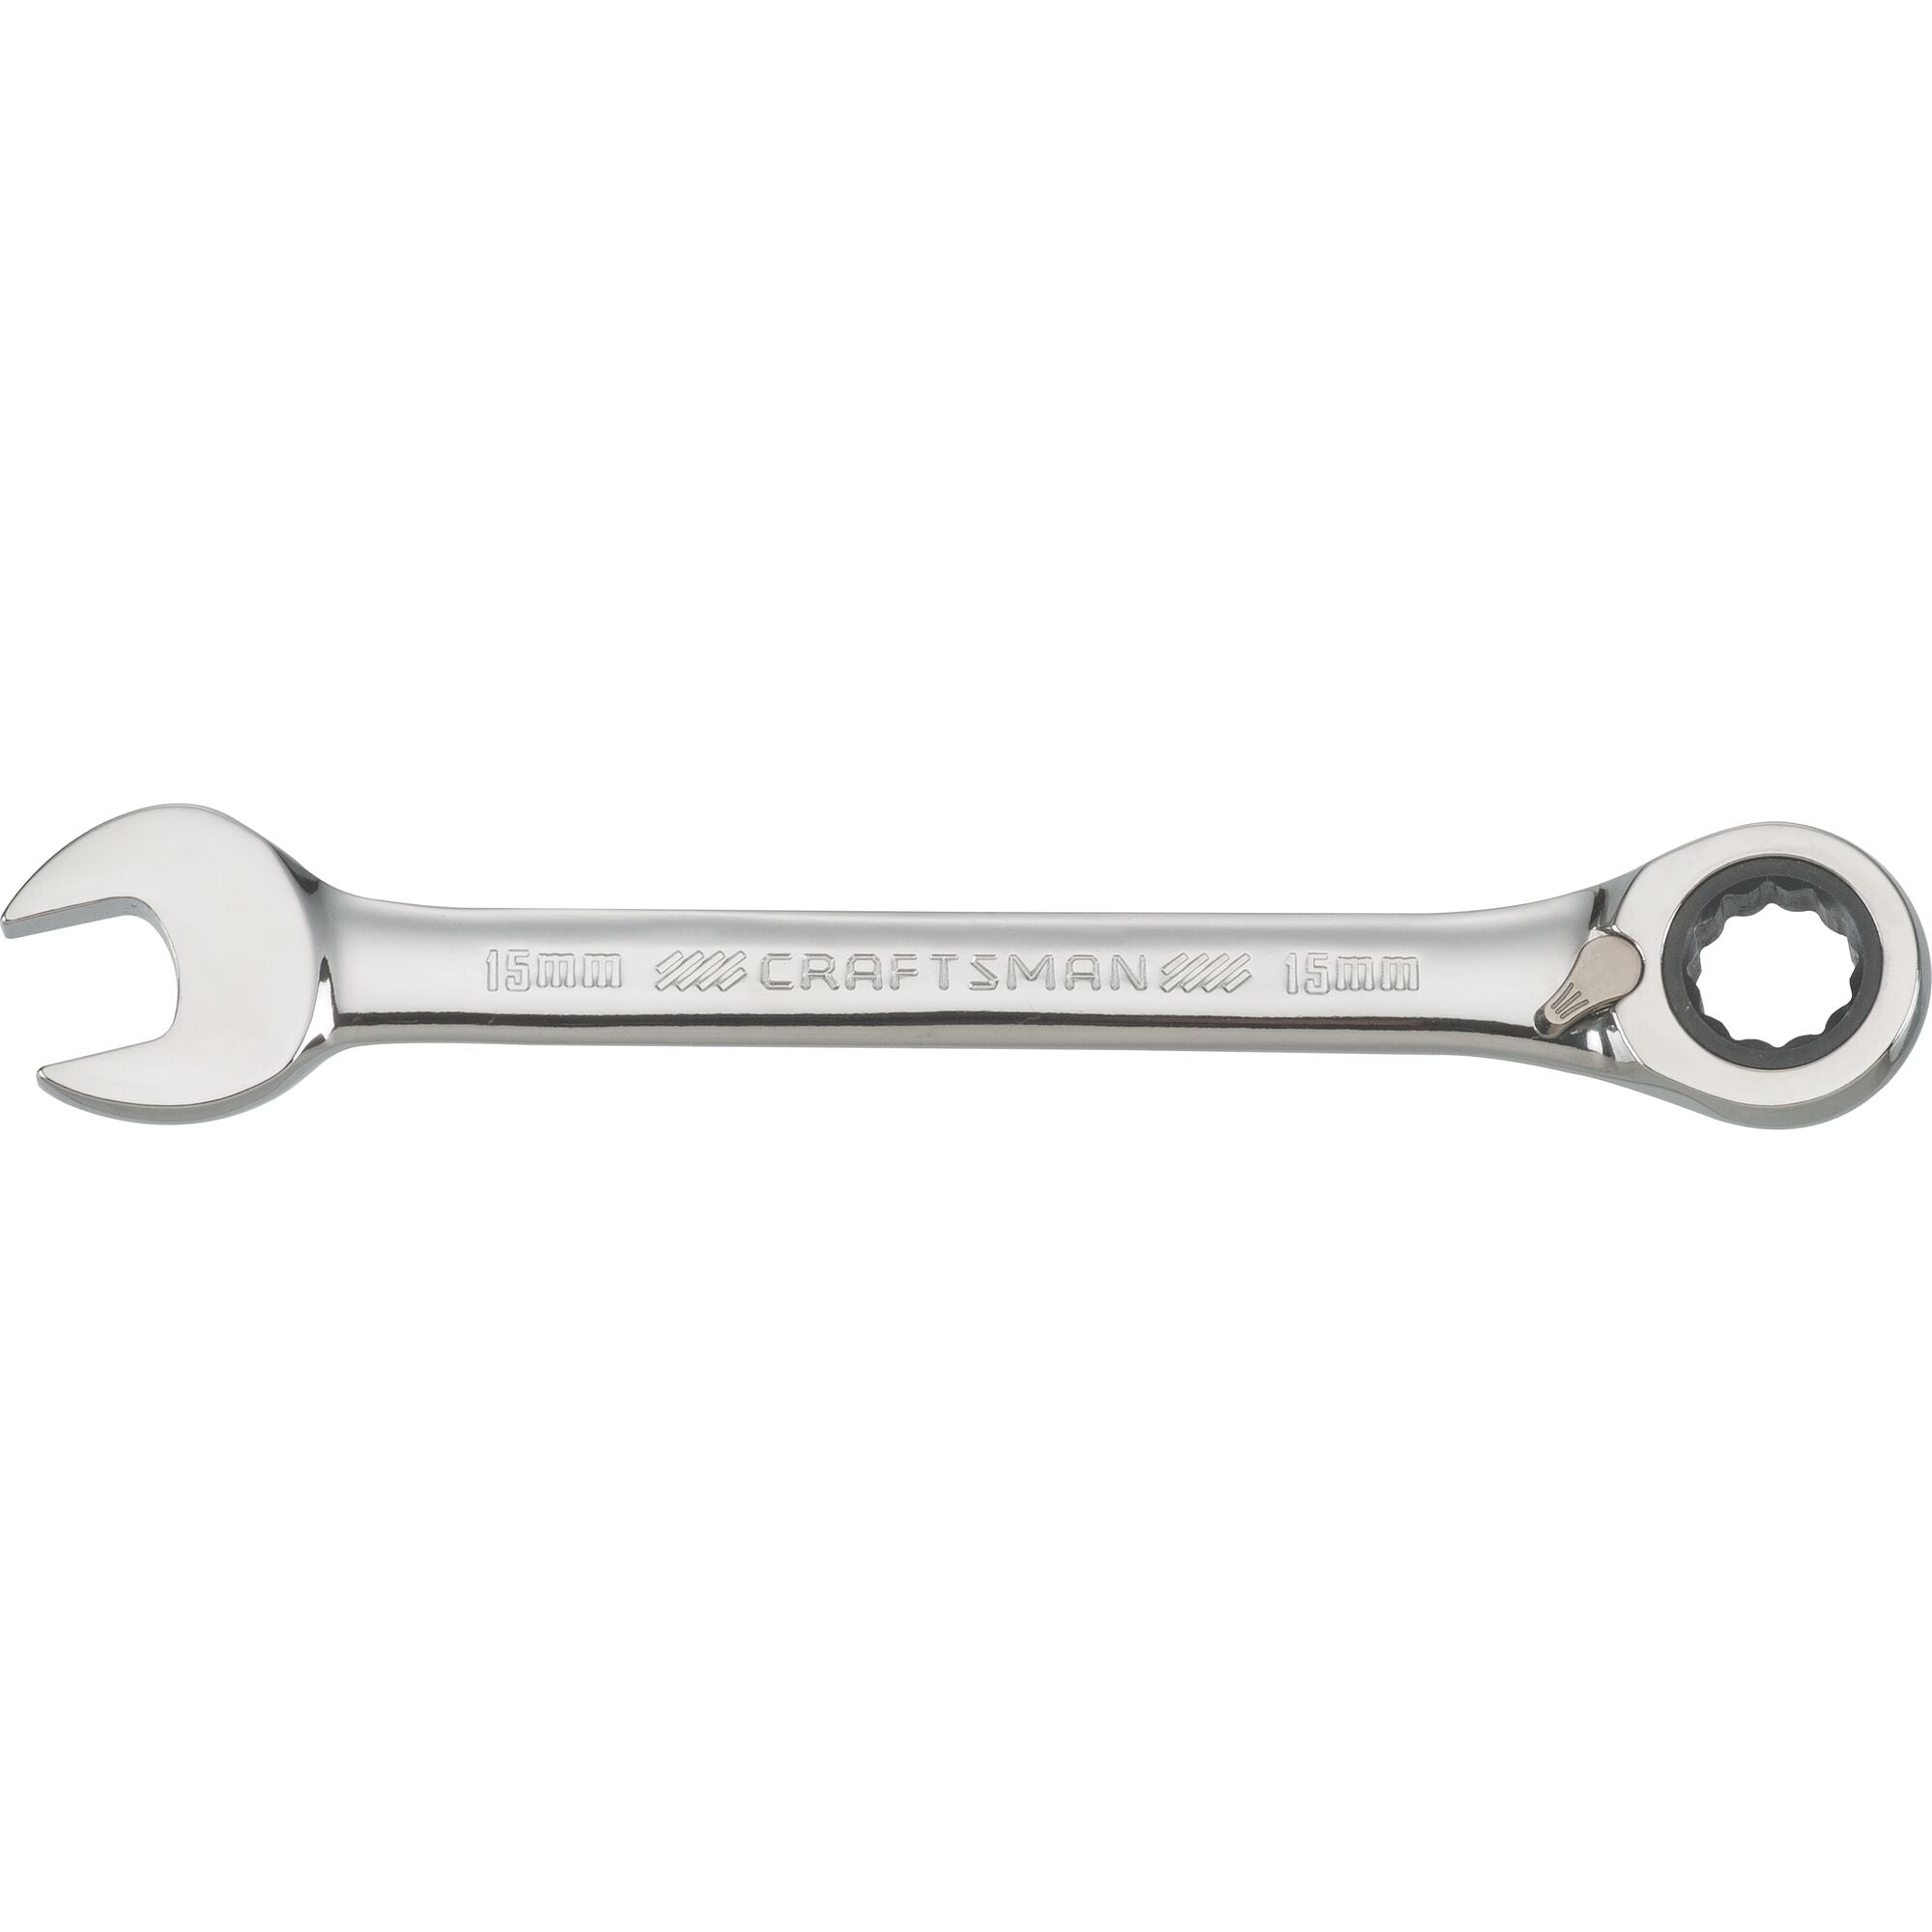 Egamaster Reversible Chain Wrench Reinforced 8 1270mm 